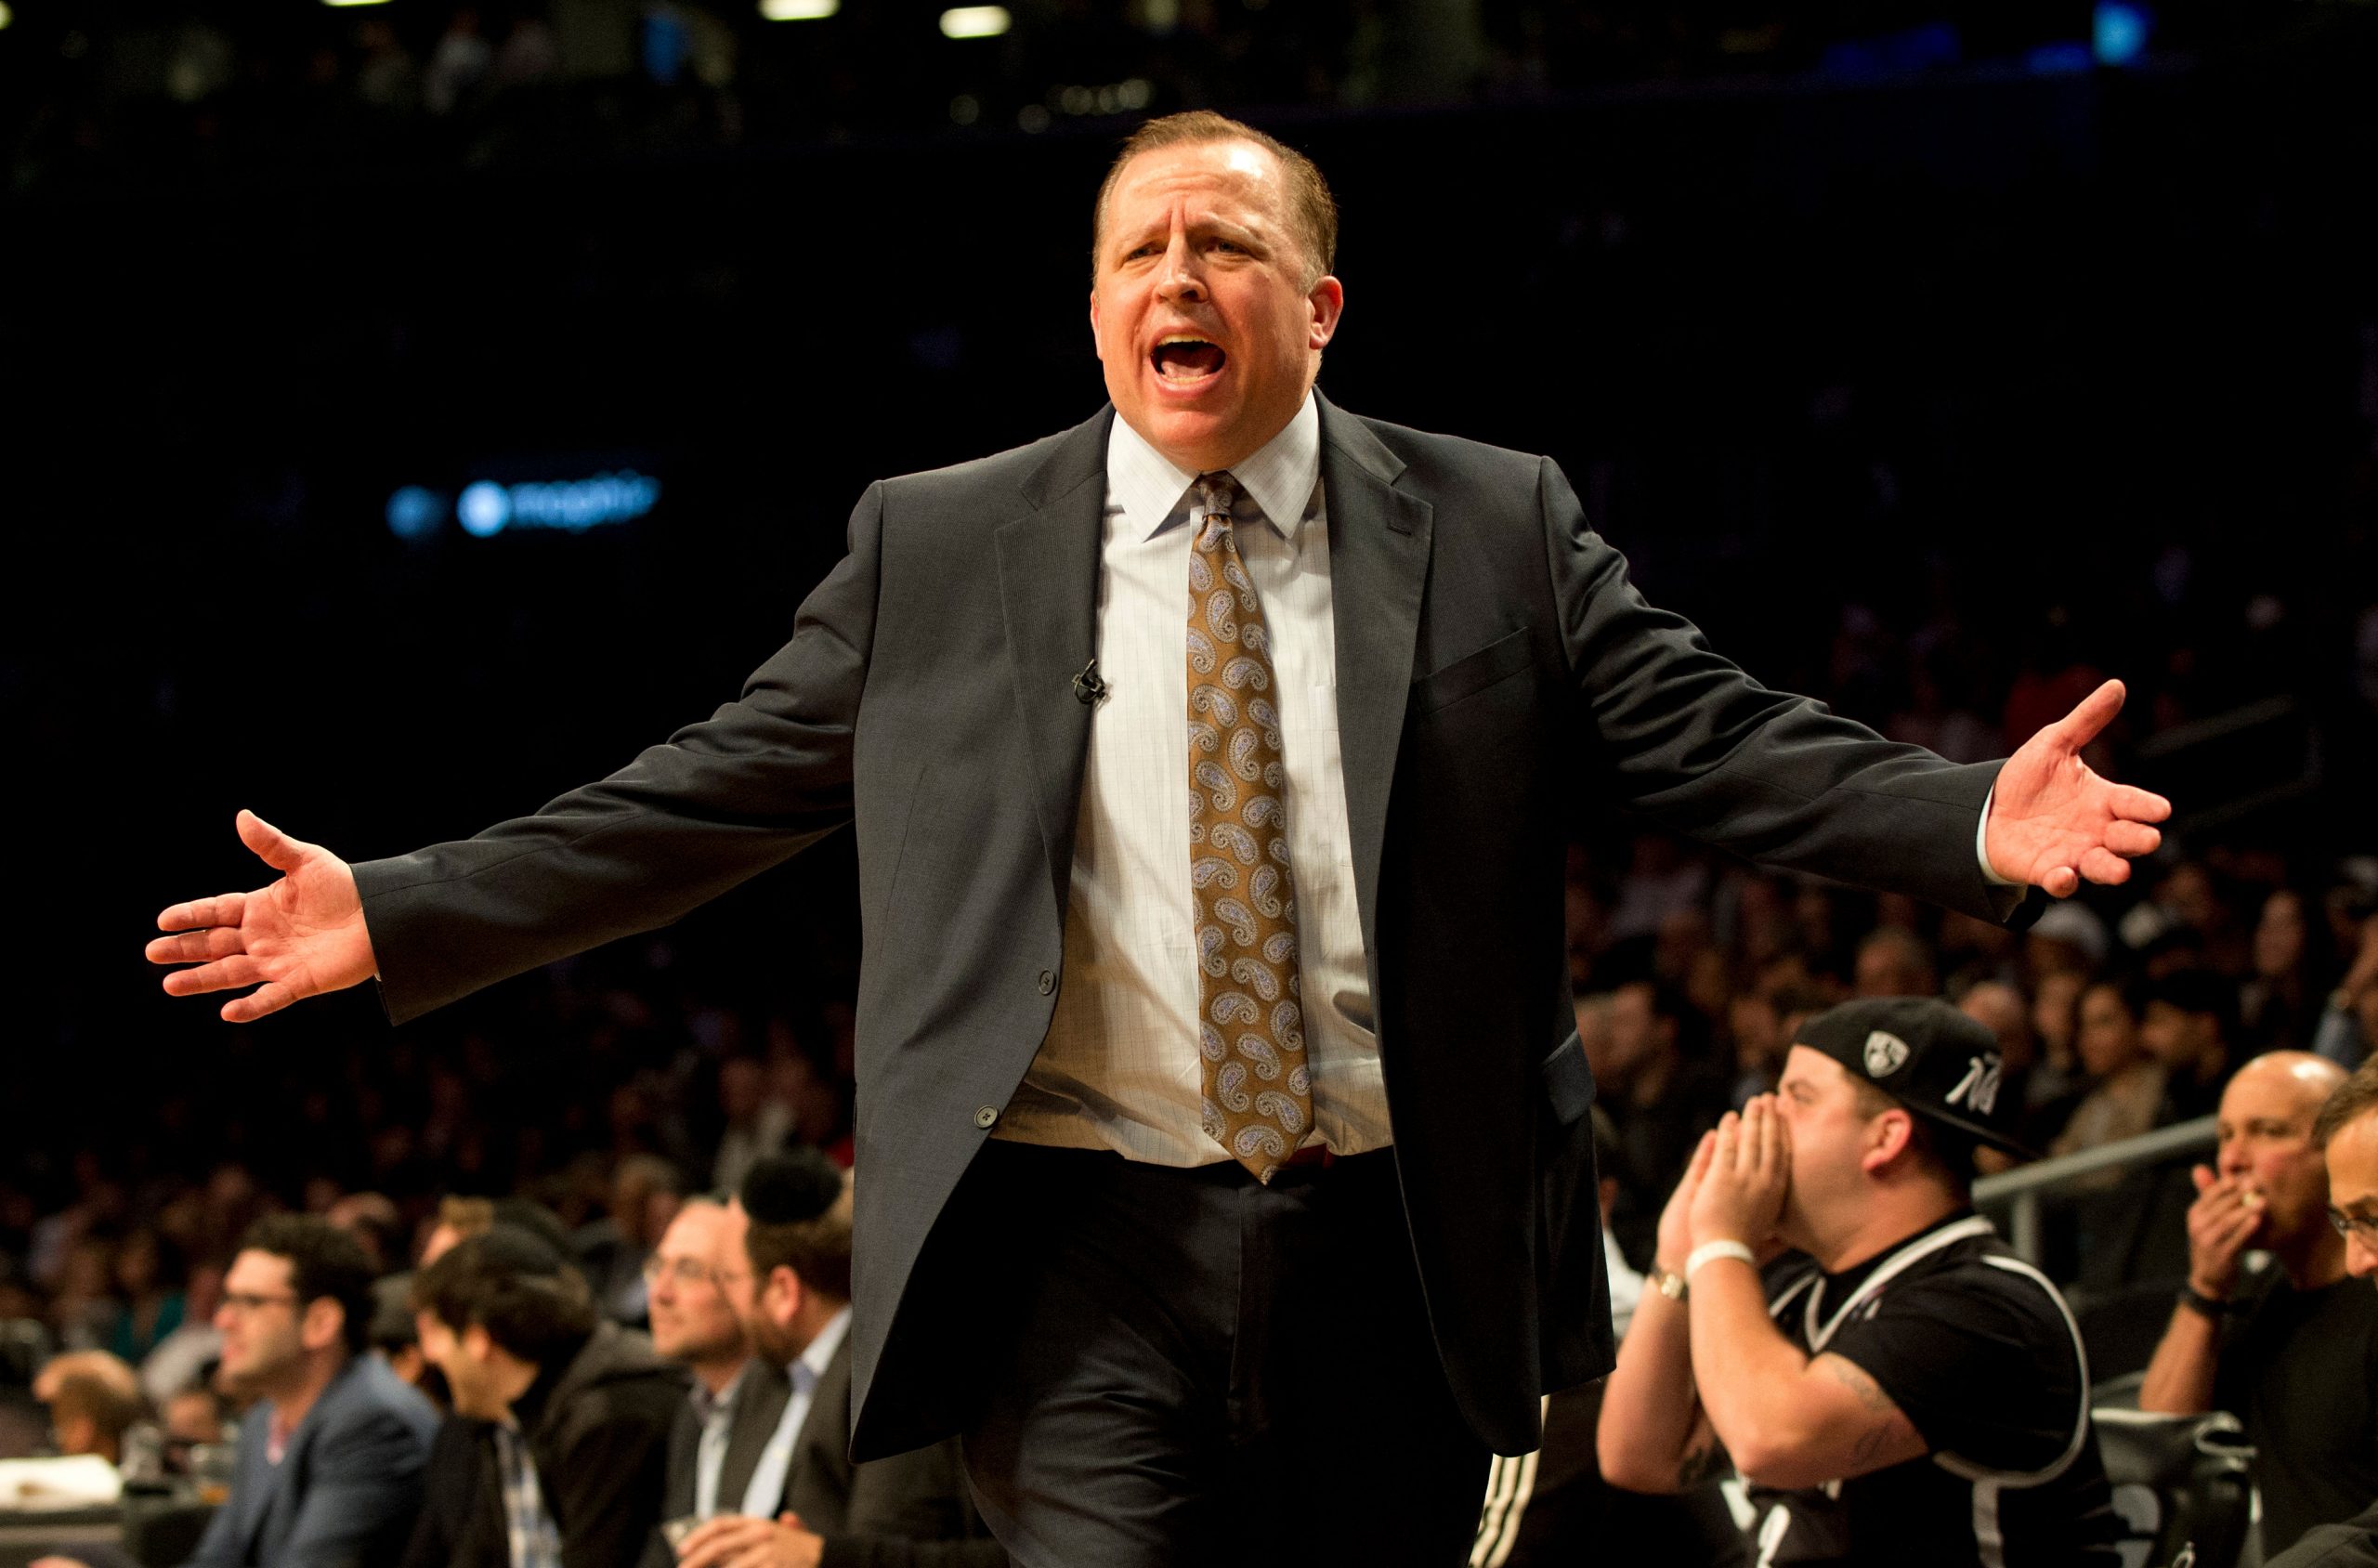 New York Knicks coach Tom Thibodeau crowned NBA coach of the year